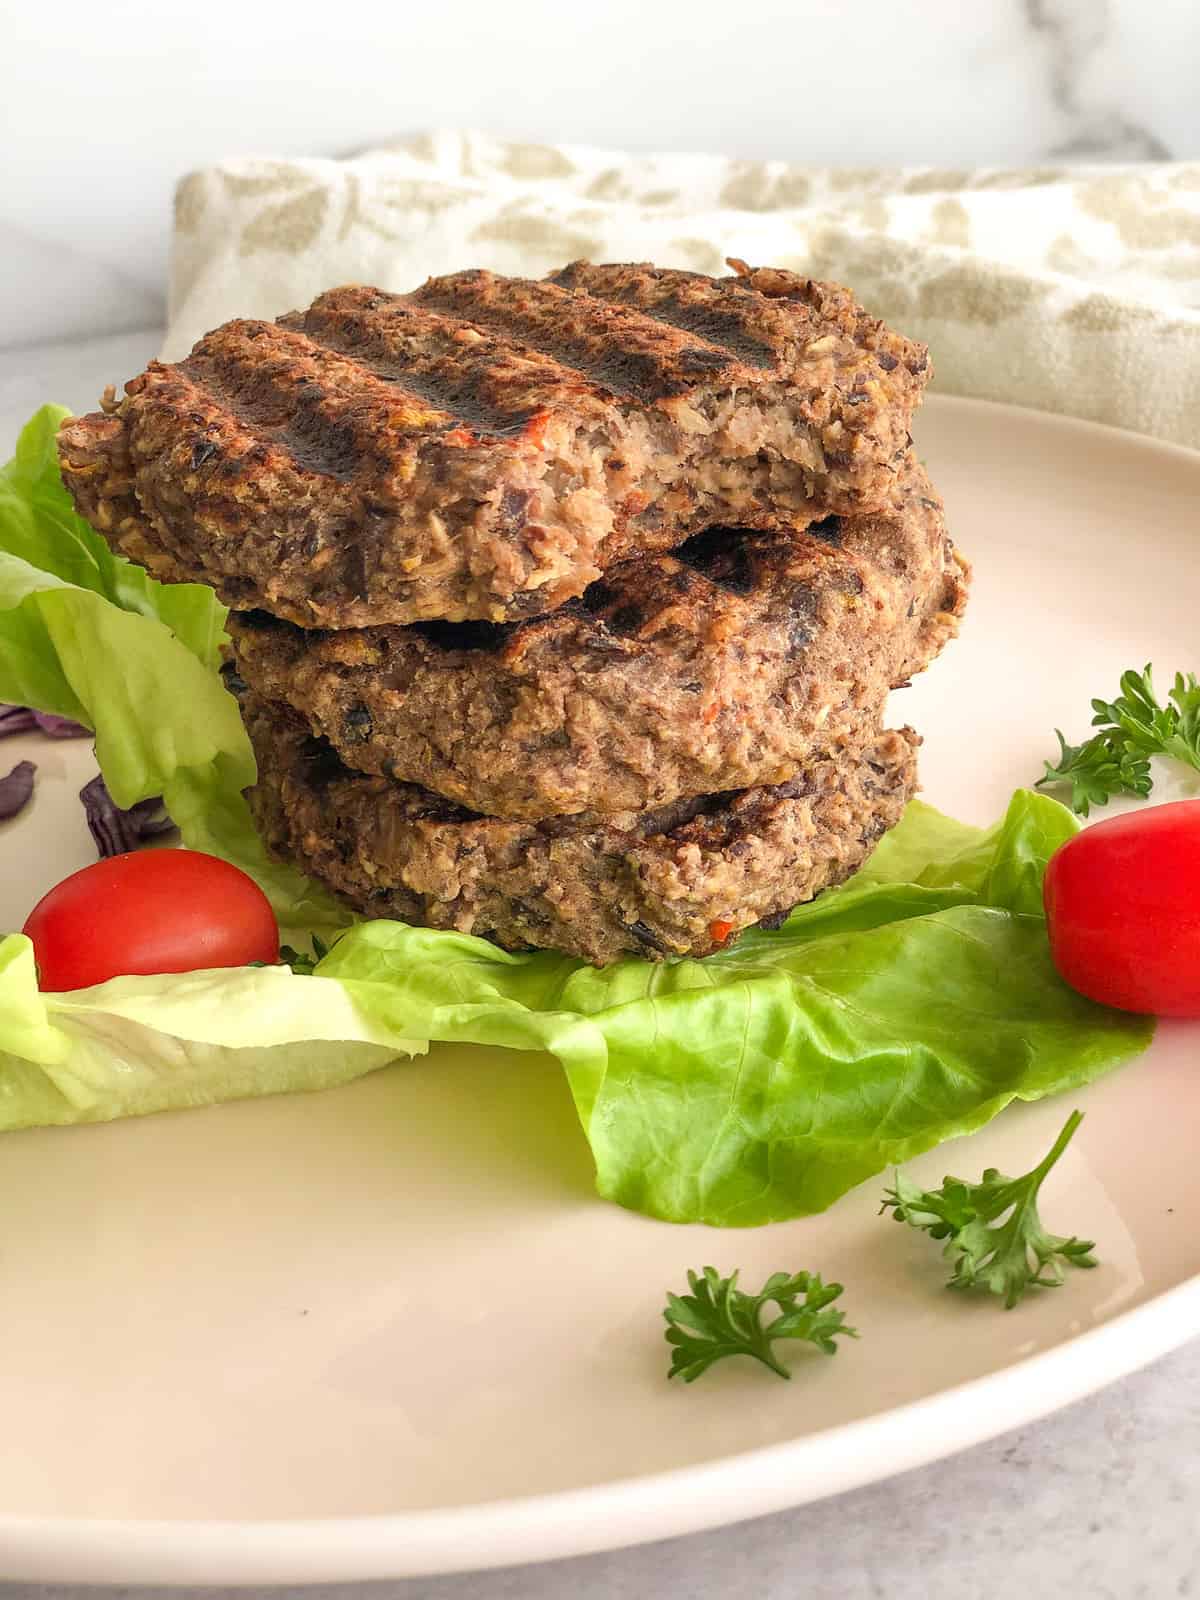 Chunks of black bean burger pieces with lettuce and tomato.